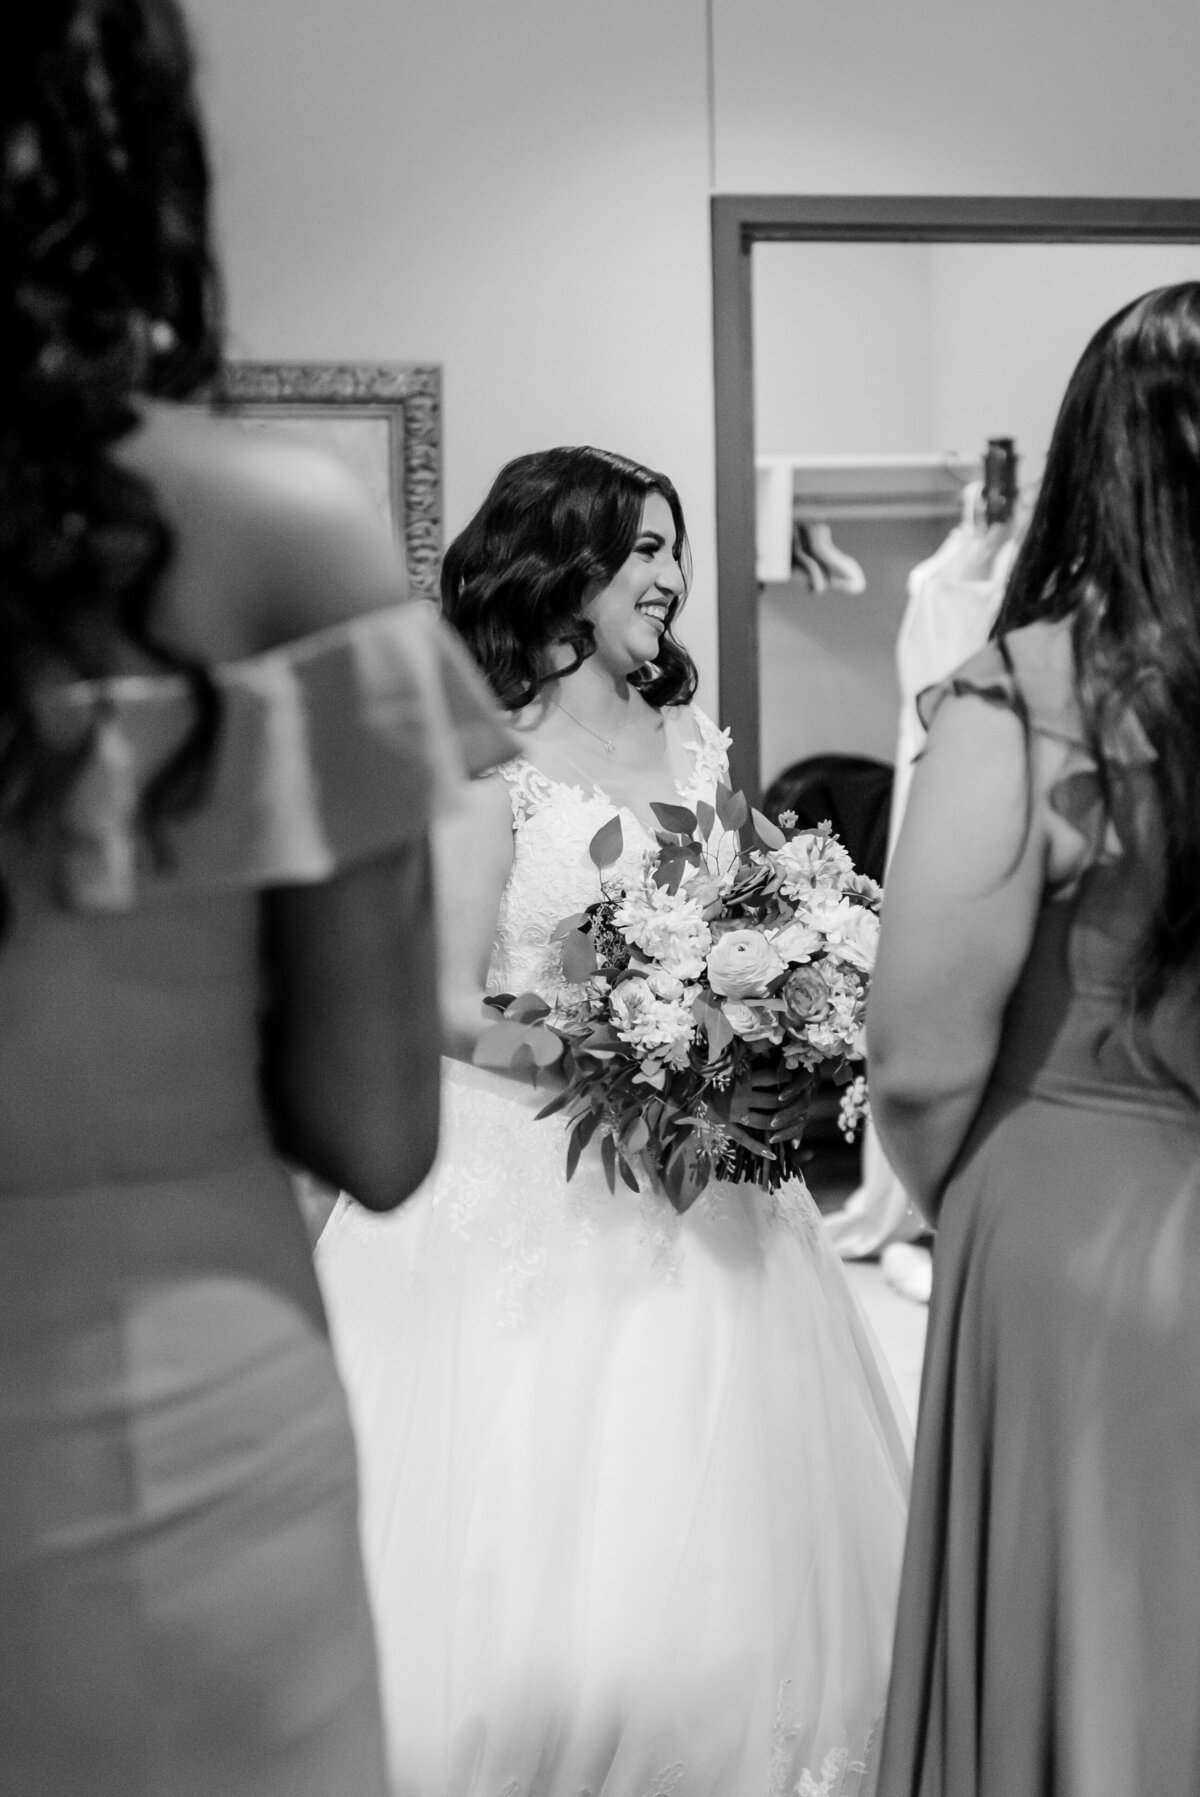 Capture the blissful moments of the bride getting ready with her girls at Anais Events Center in Bellaire, Texas, as they share laughter and love on this special day.